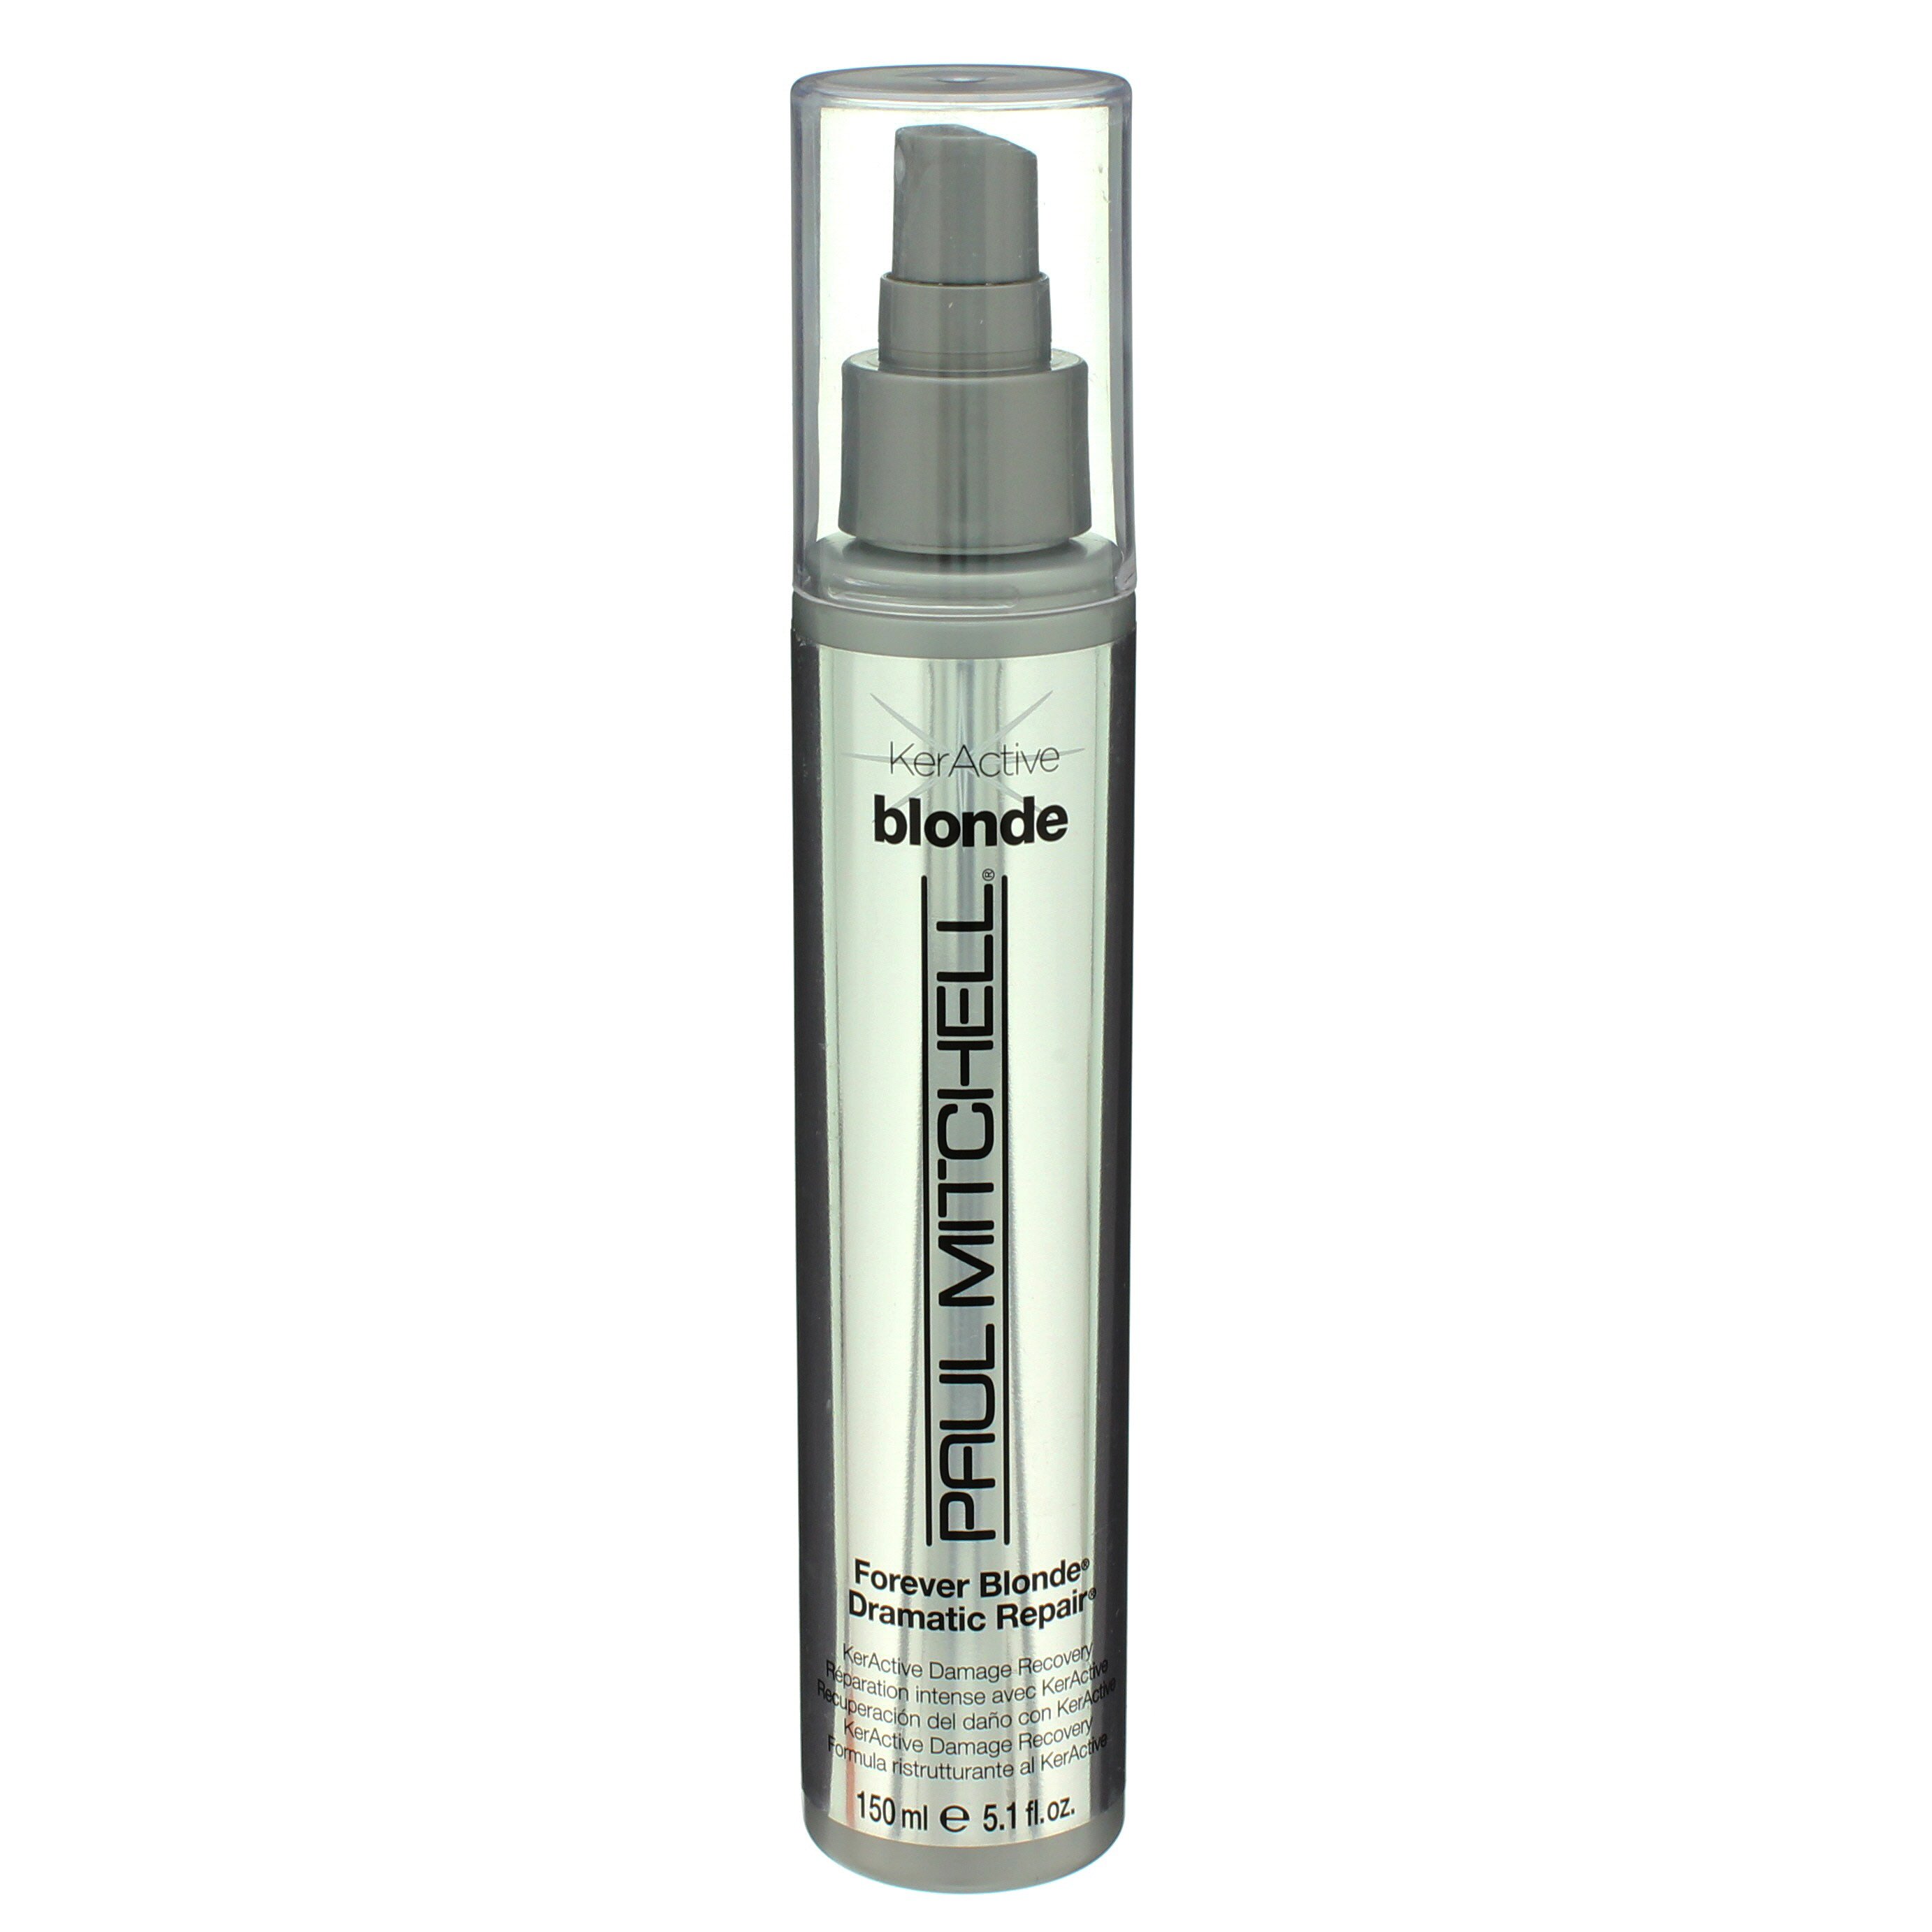 Paul Mitchell Forever Blonde Dramatic Repair - Shampoo & Conditioner at H-E-B